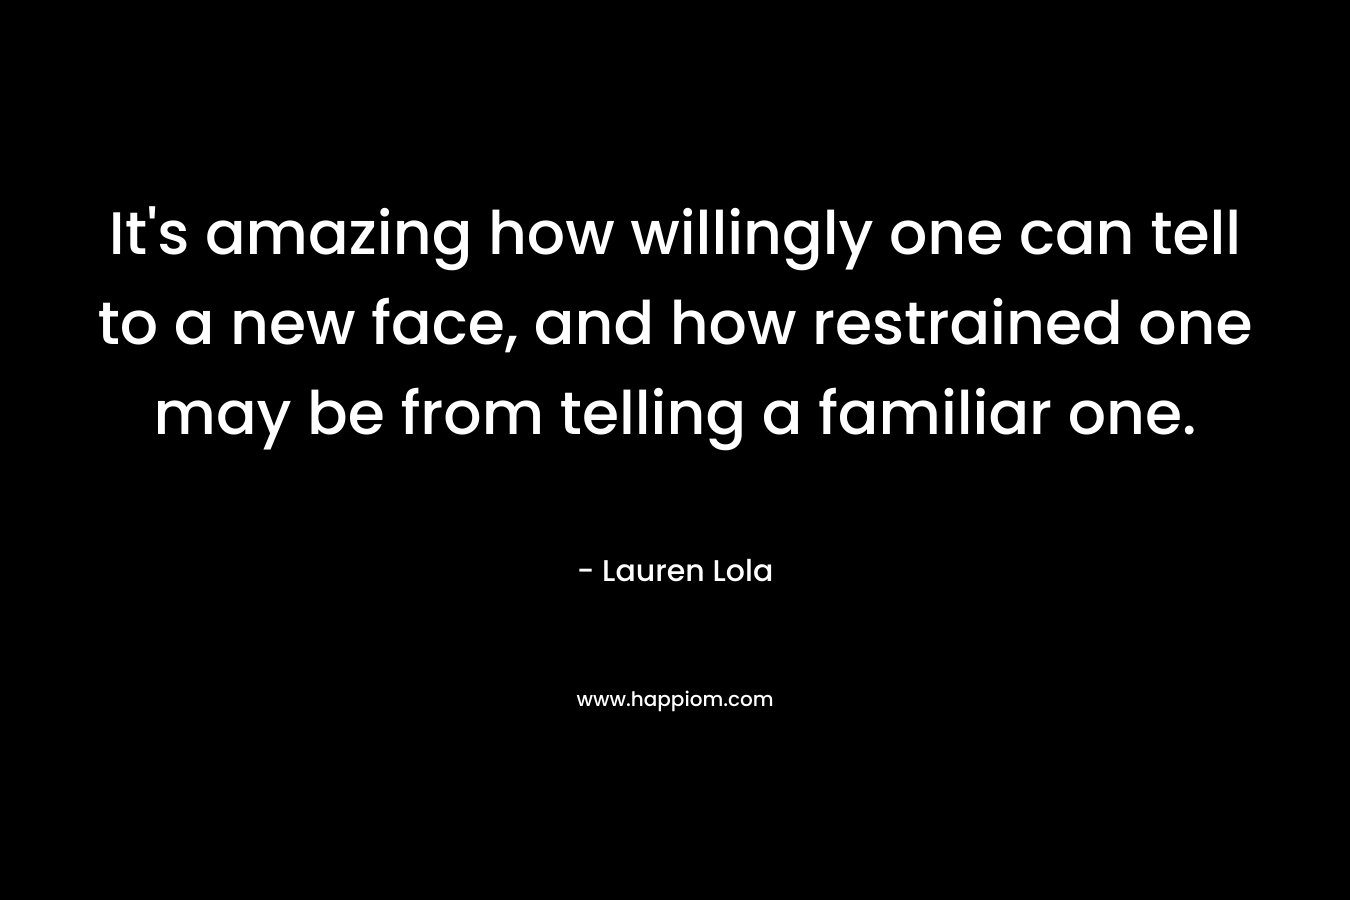 It's amazing how willingly one can tell to a new face, and how restrained one may be from telling a familiar one.